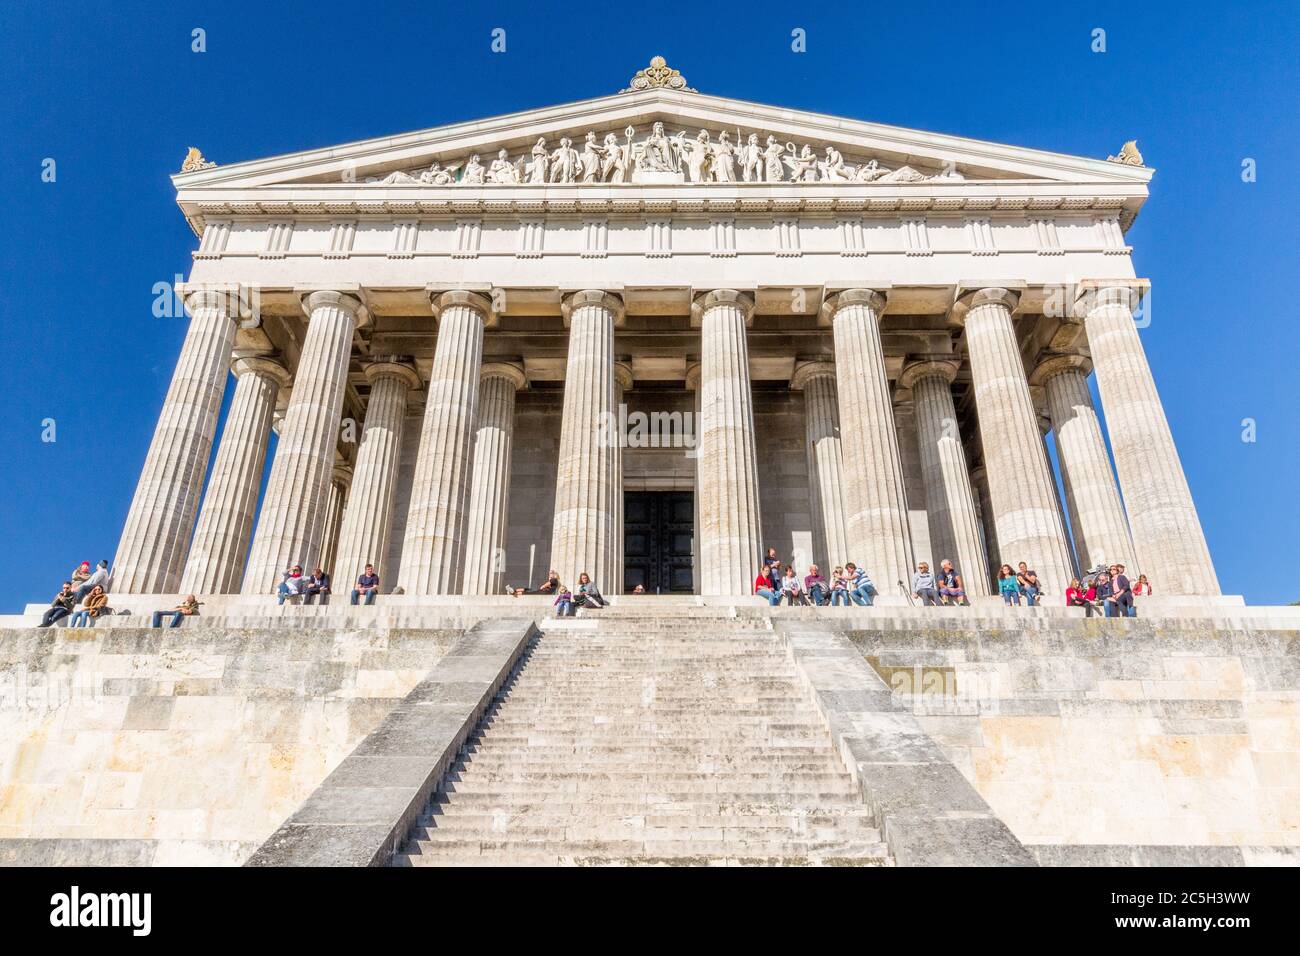 Close up / front view of Walhalla - hall of fame of german personalities. View on stairs and columns / pillars. Example of classicism. Monument. Stock Photo